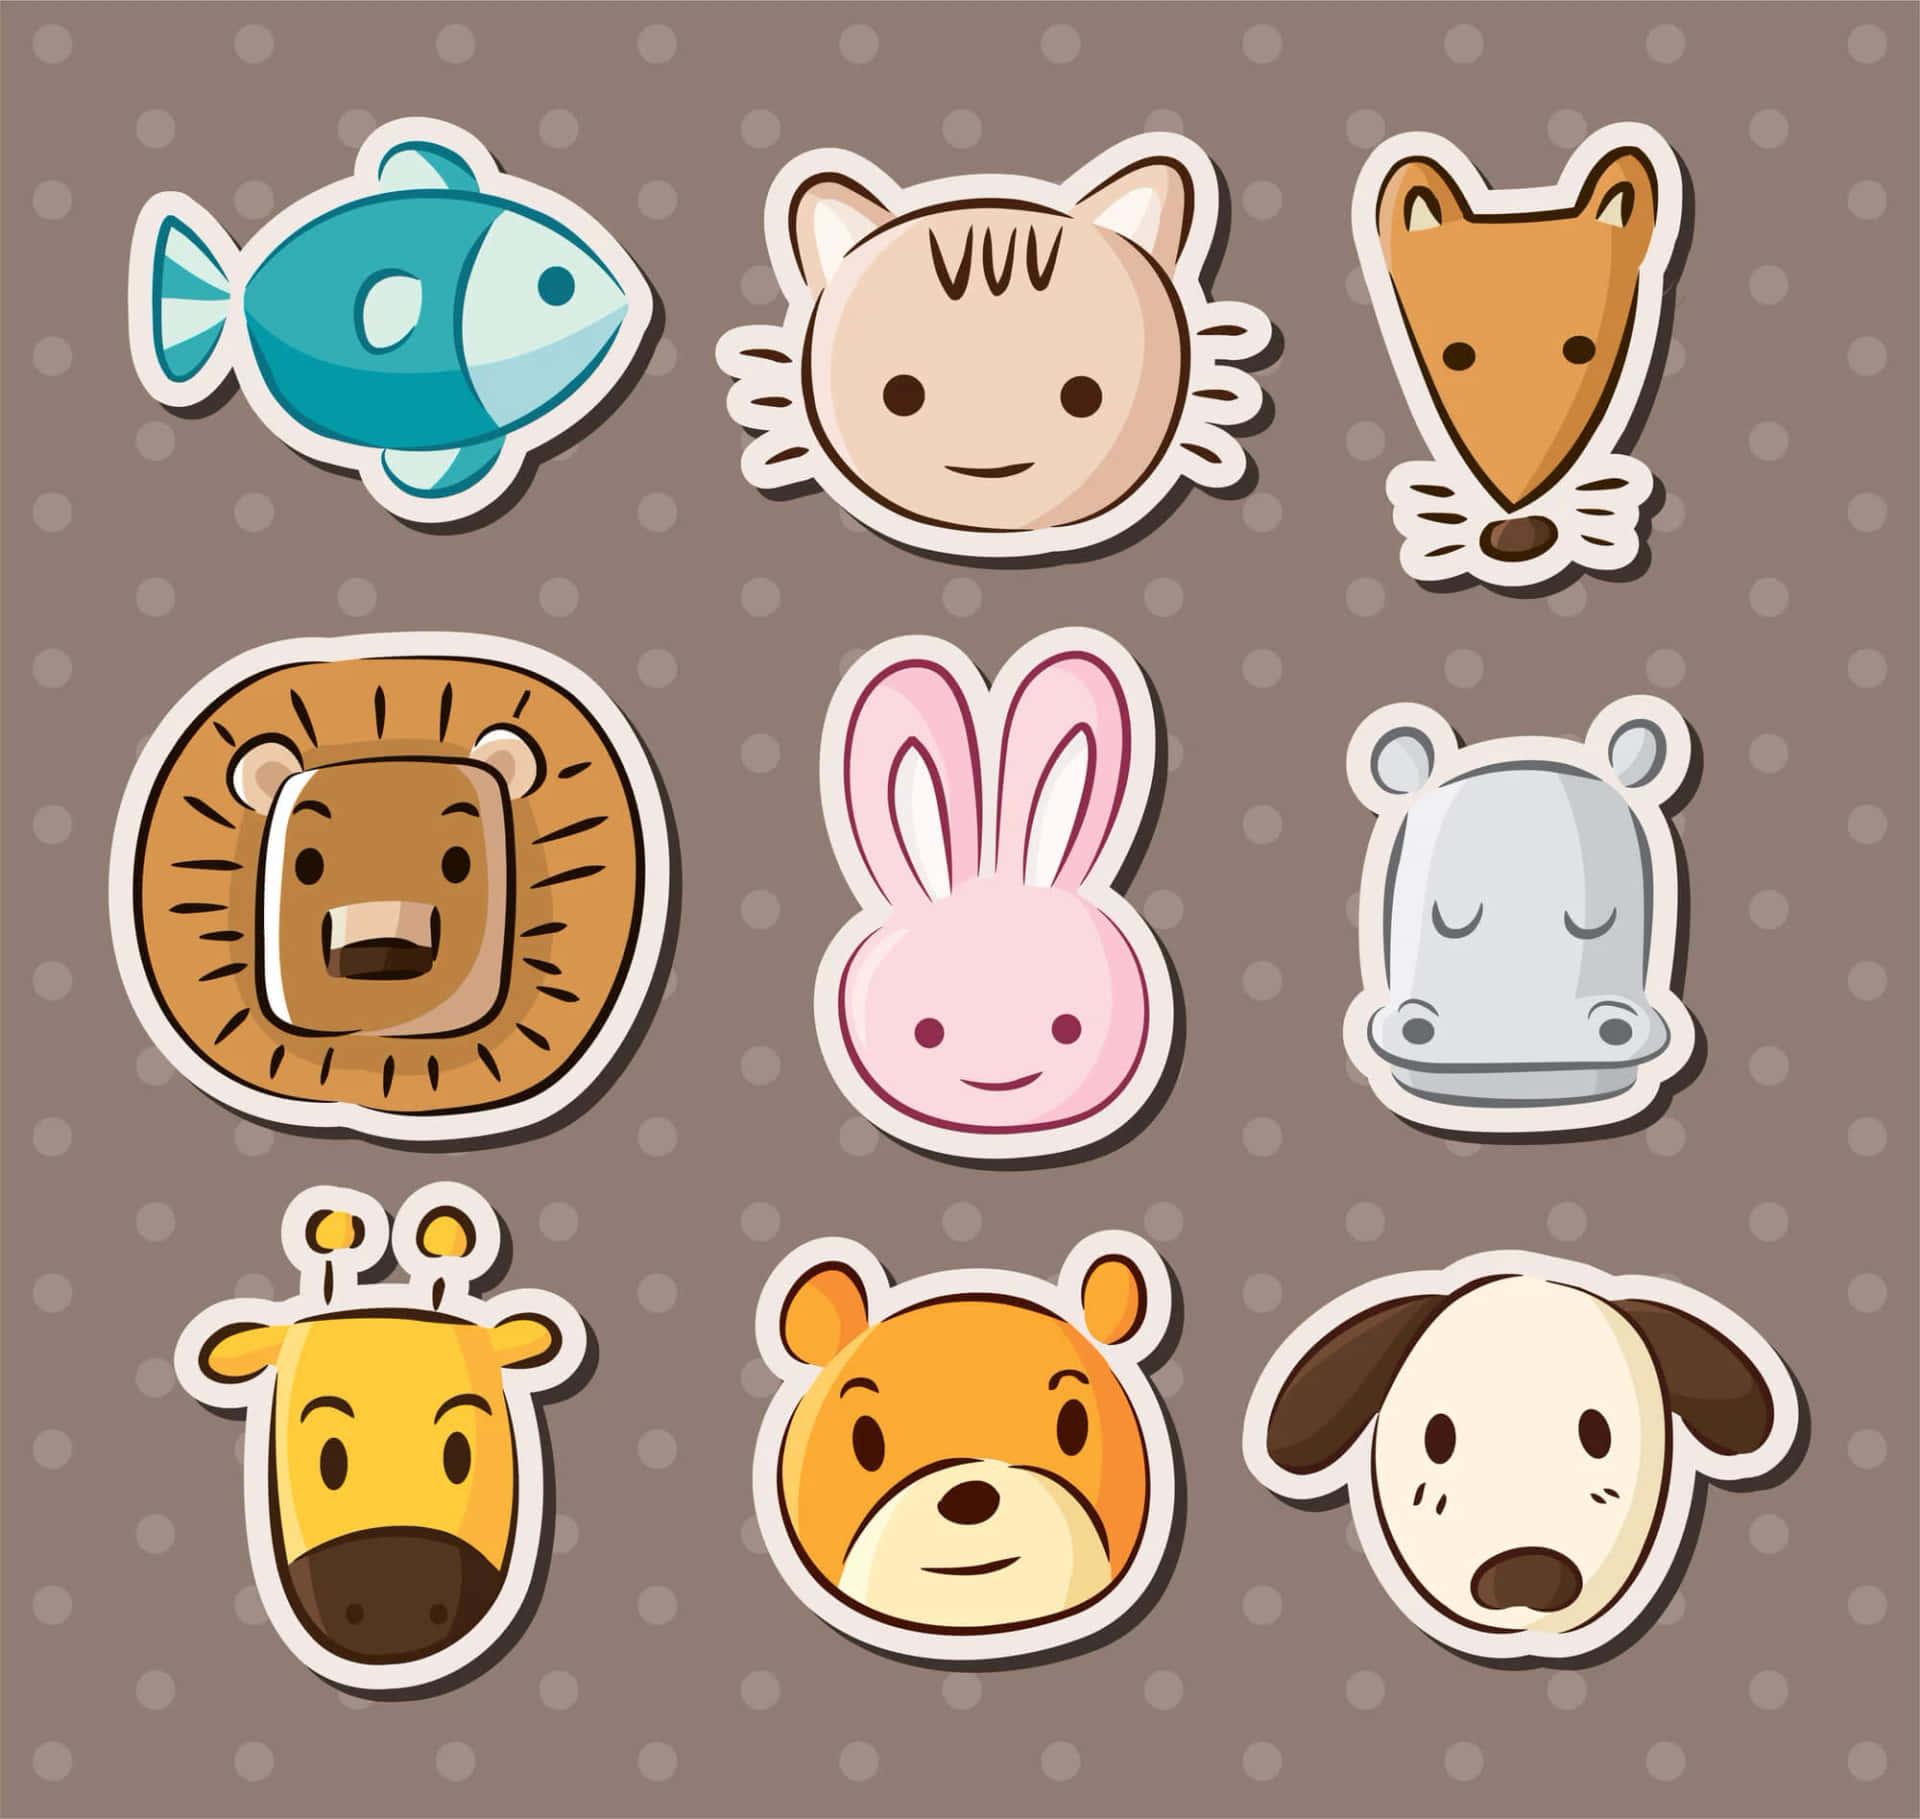 Show your creative personality with stickers.